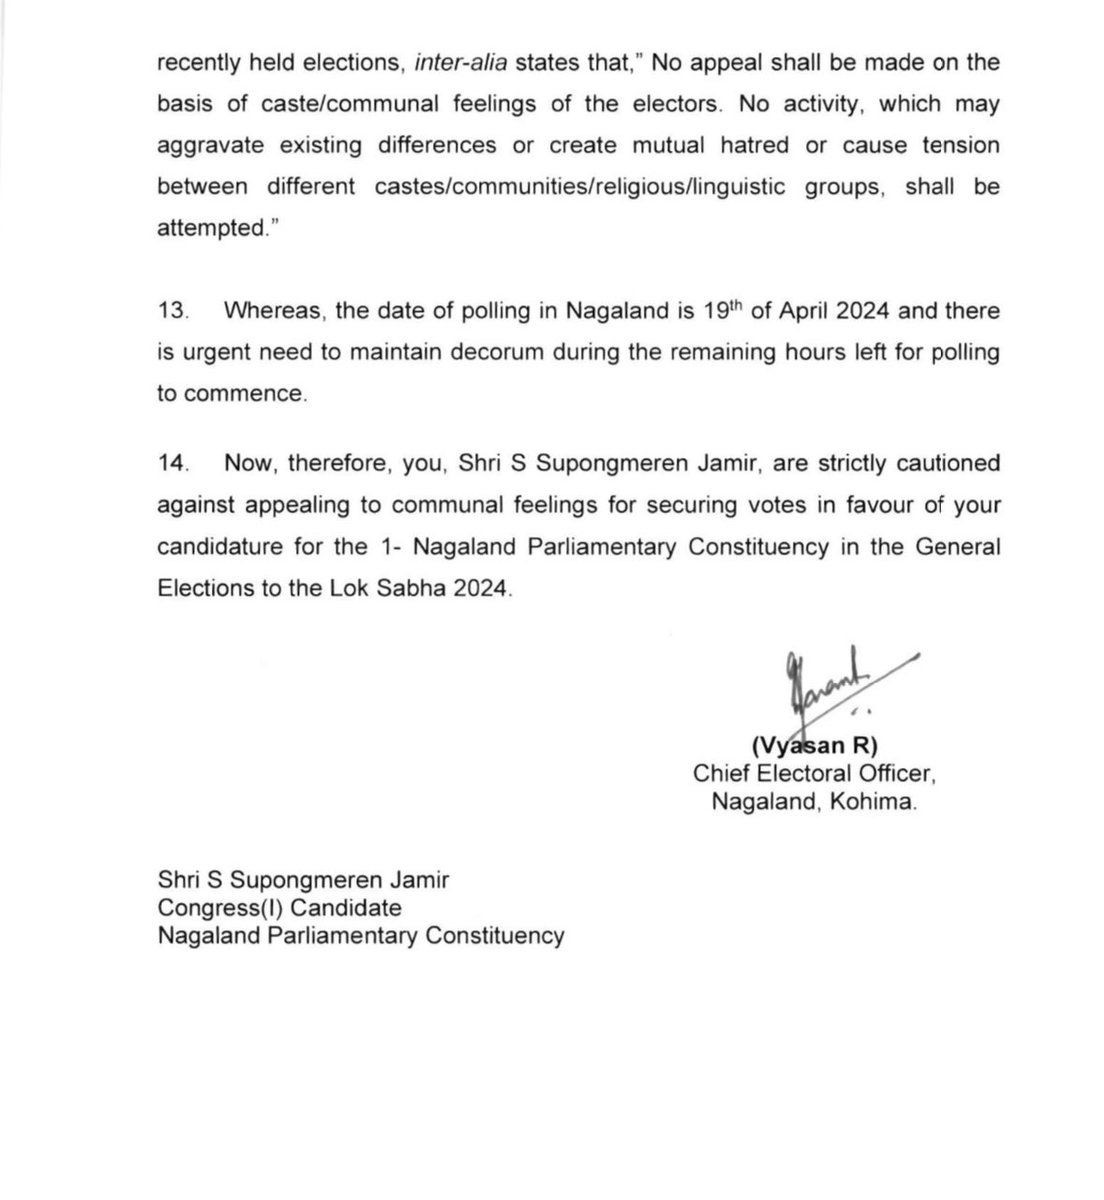 This is what the Congress gets for using derogatory communal hate speeches on religious lines. ECI notice to Congress candidate Shri Supongmeren Jamir.